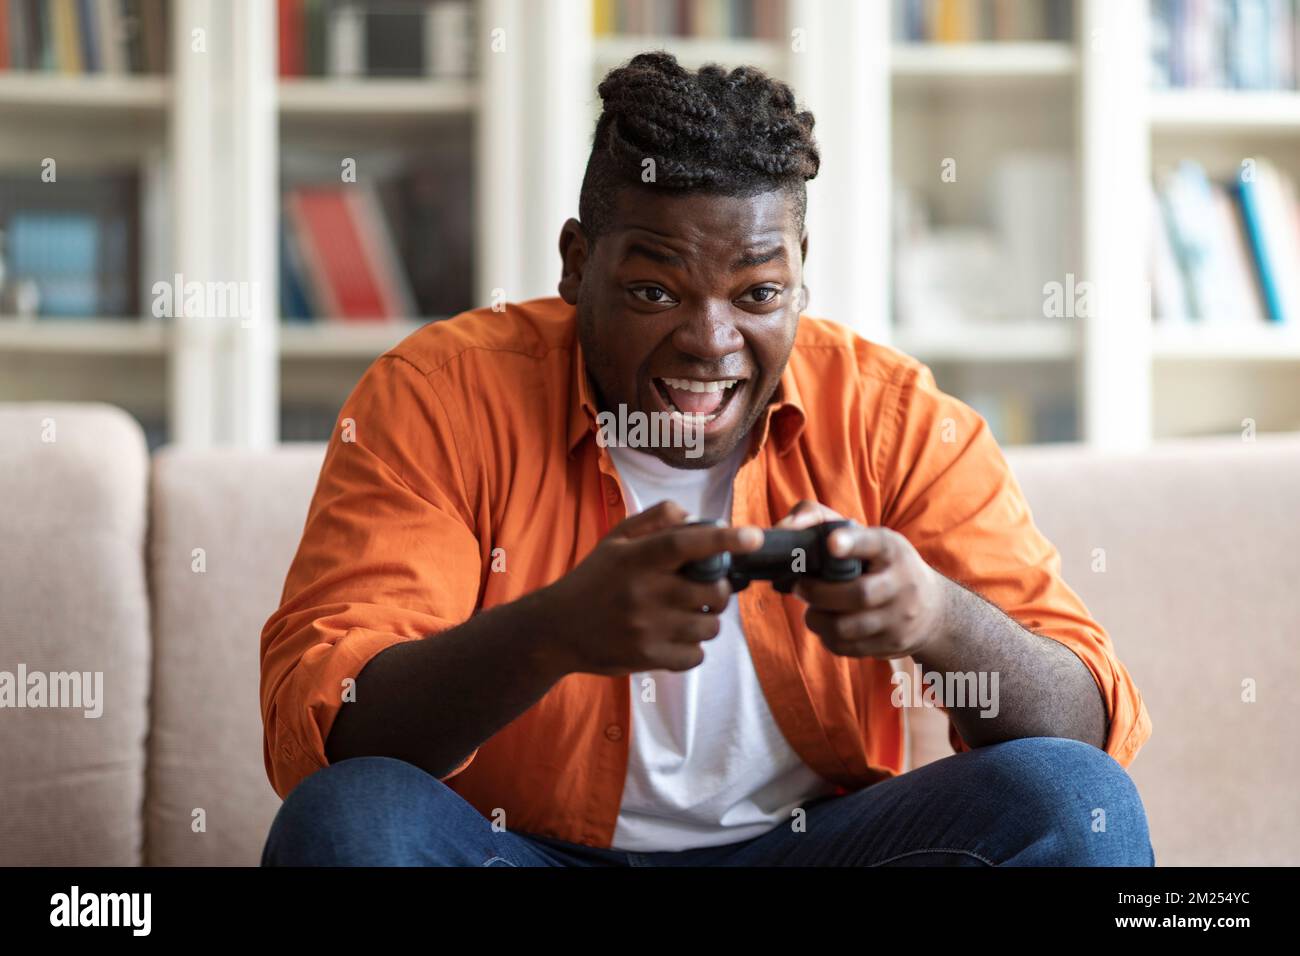 Handsome young black man playing video games at home Stock Photo